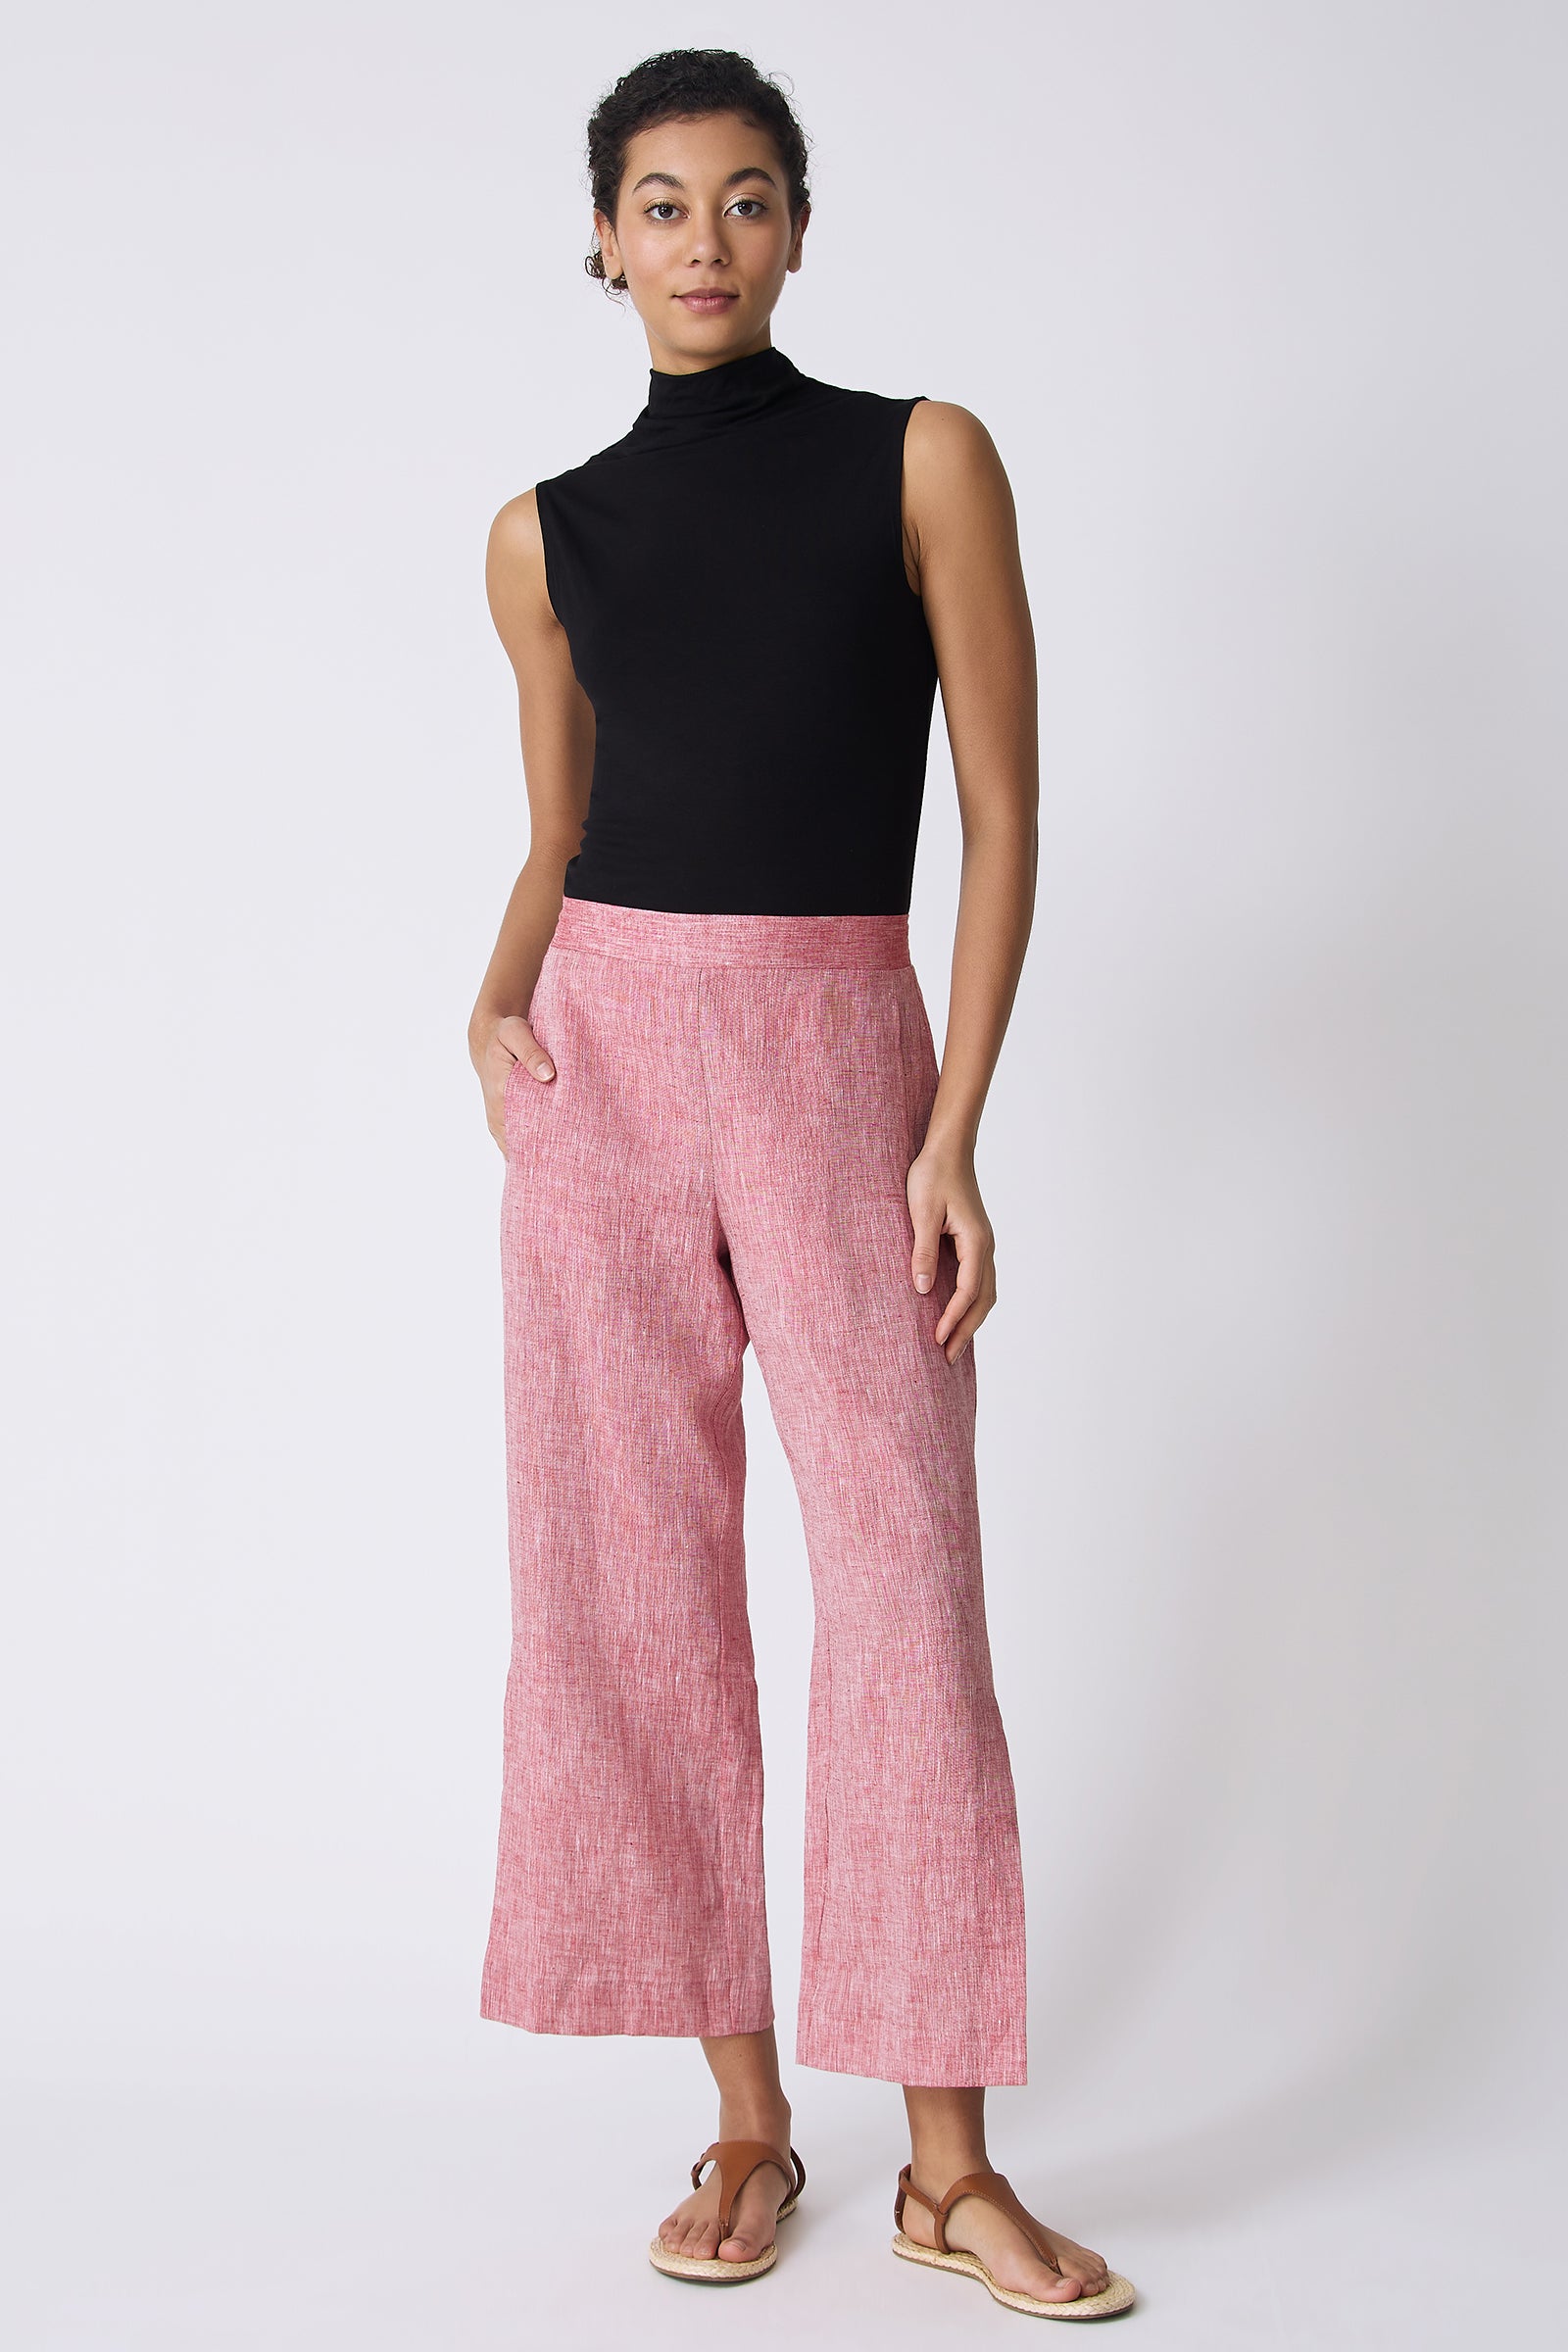 Buy Indifusion Women Solid Maroon Pant online